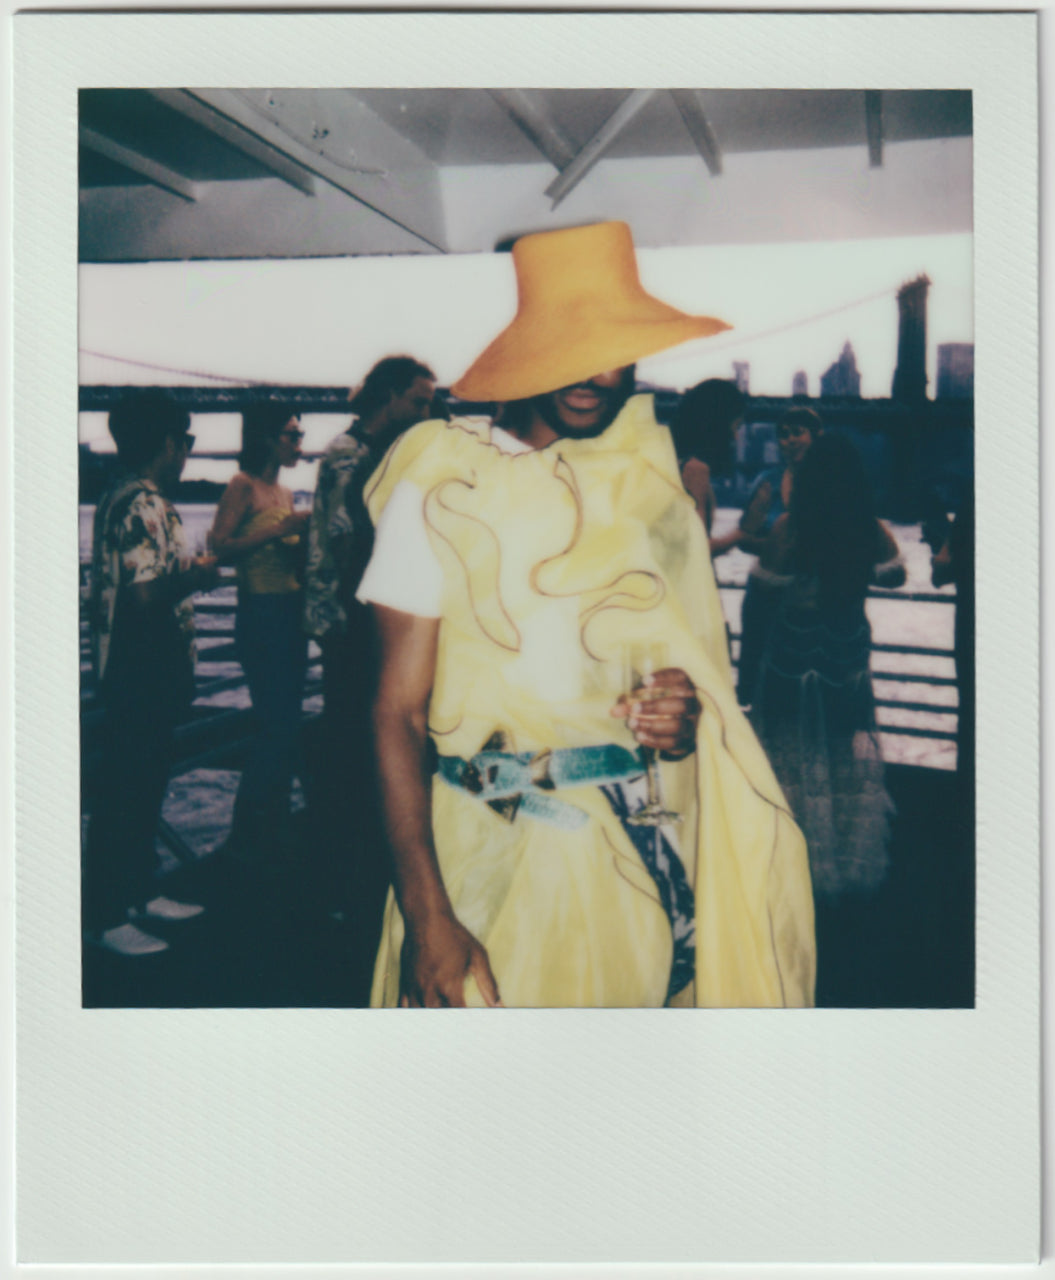 employee wearing all yellow outfit, posing - polaroid style. 